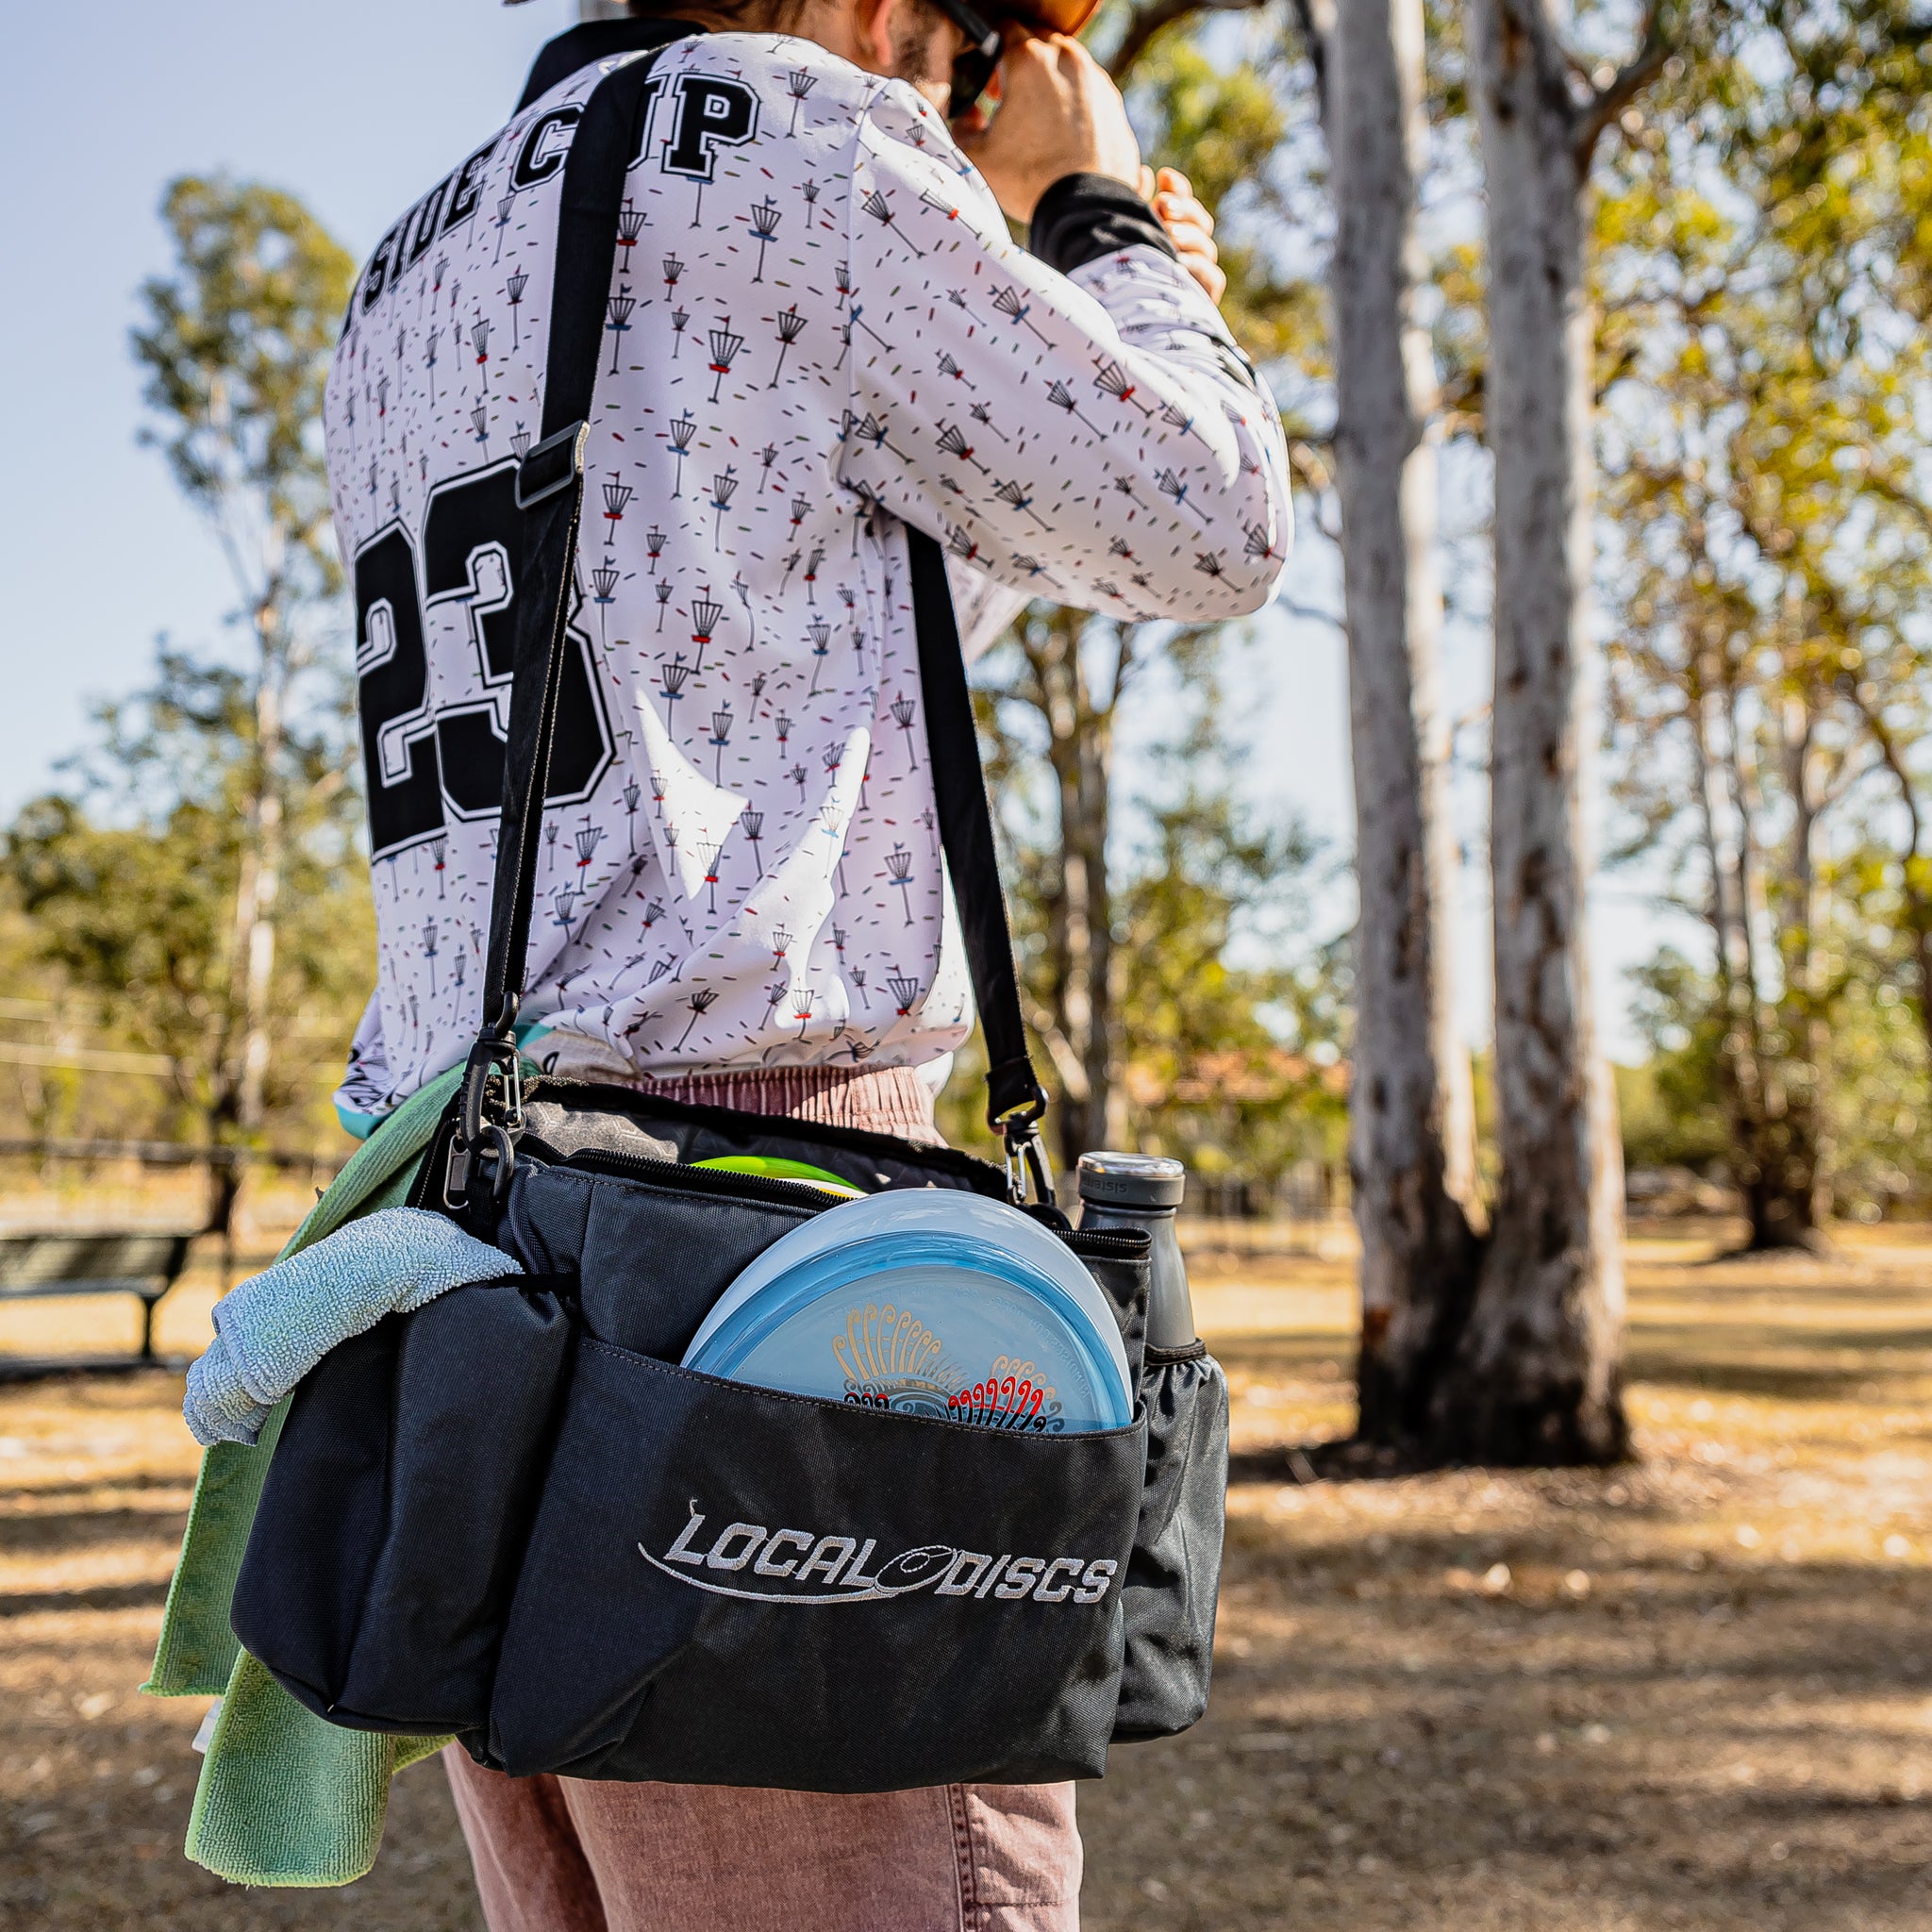 Local Discs disc golf bag with discs on a player's shoulder